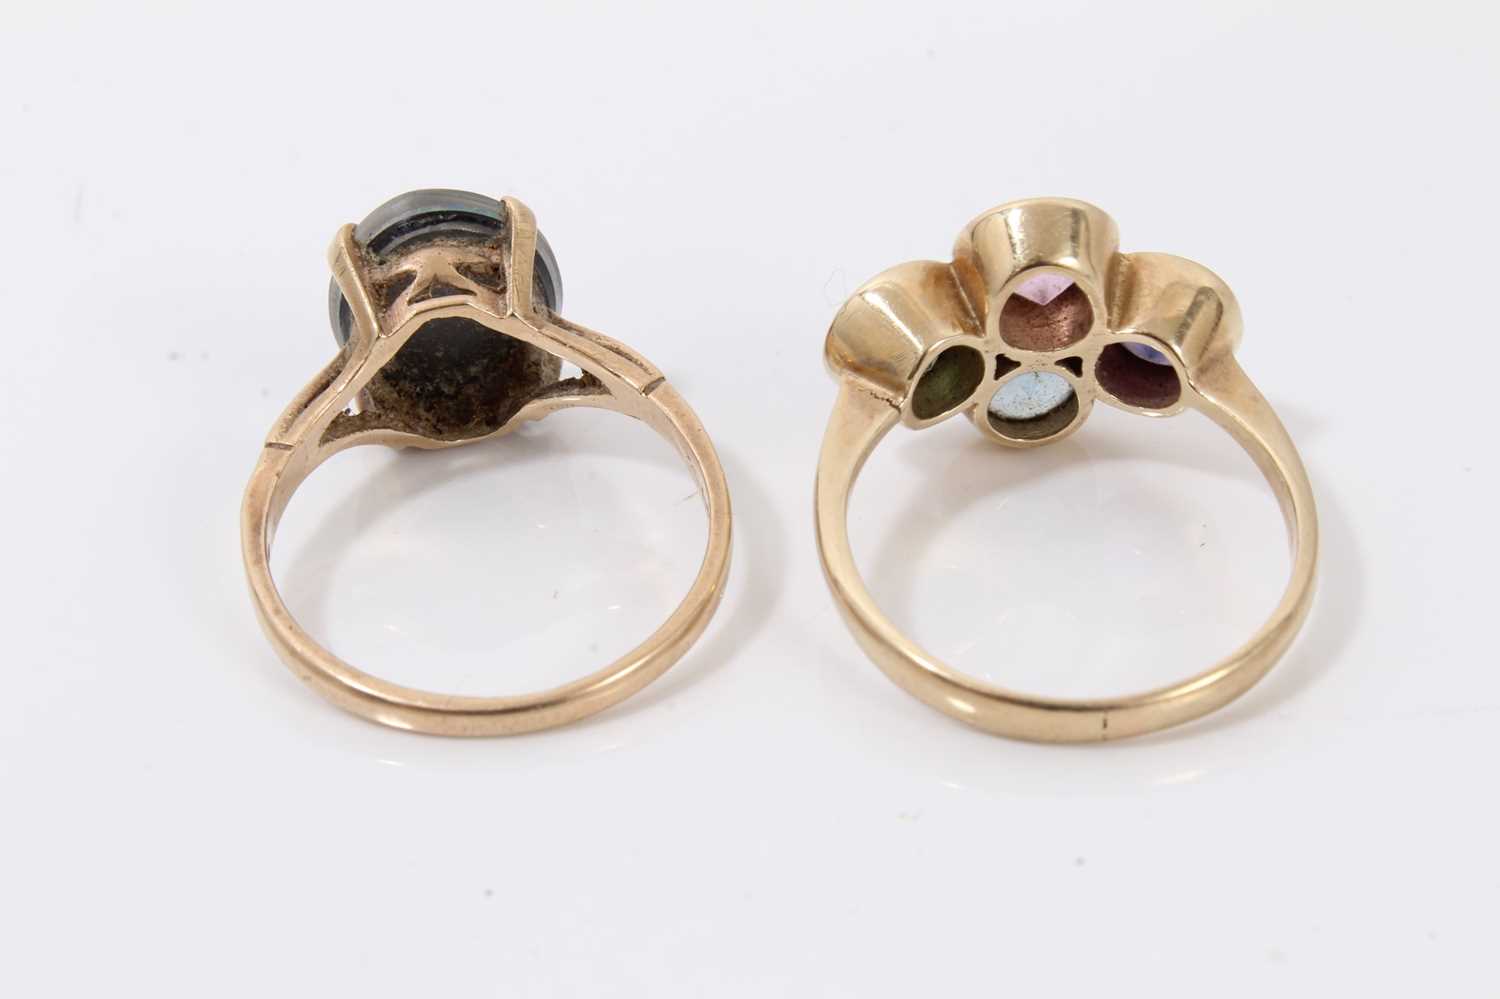 Two gold and gem-set rings - Image 3 of 3